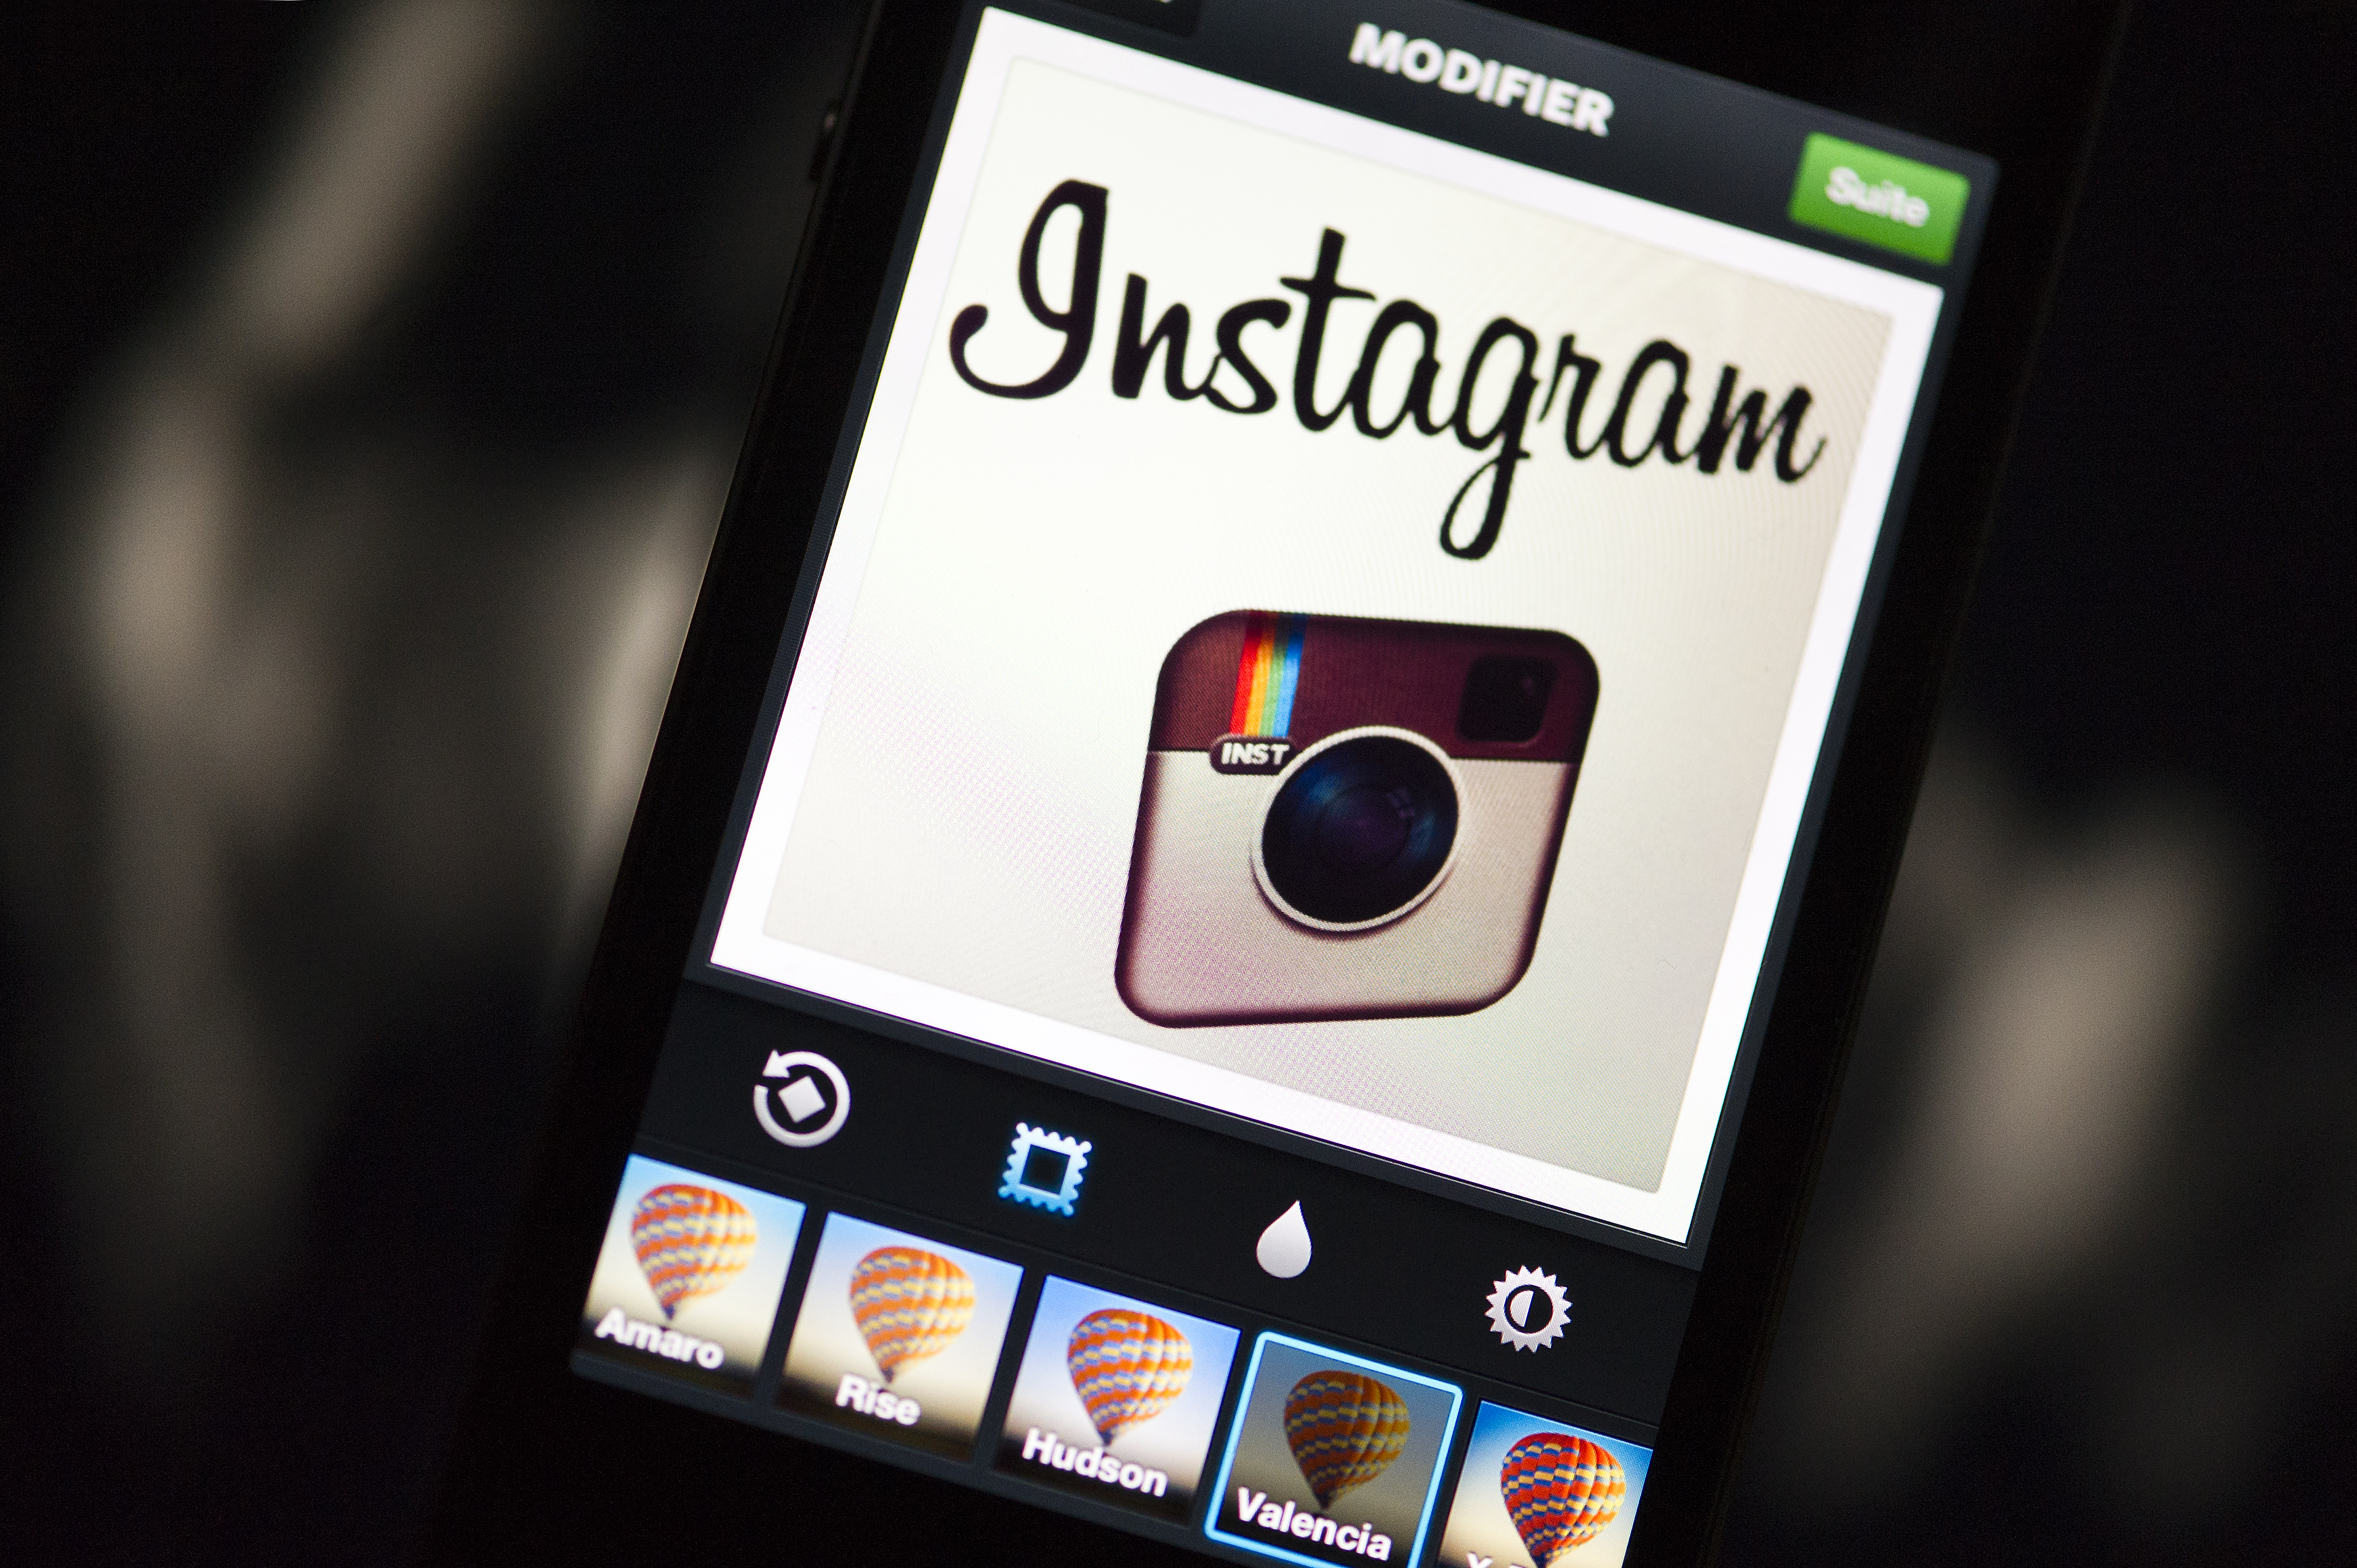 The Instagram logo is displayed on a smartphone on December 20, 2012 in Paris. Instagram backed down on December 18, 2012 from a planned policy change that appeared to clear the way for the mobile photo sharing service to sell pictures without compensation, after users cried foul. Changes to the Instagram privacy policy and terms of service set to take effect January 16 had included wording that appeared to allow people's pictures to be used by advertisers at Instagram or Facebook worldwide, royalty-free.   AFP PHOTO / LIONEL BONAVENTURE / AFP PHOTO / LIONEL BONAVENTURE